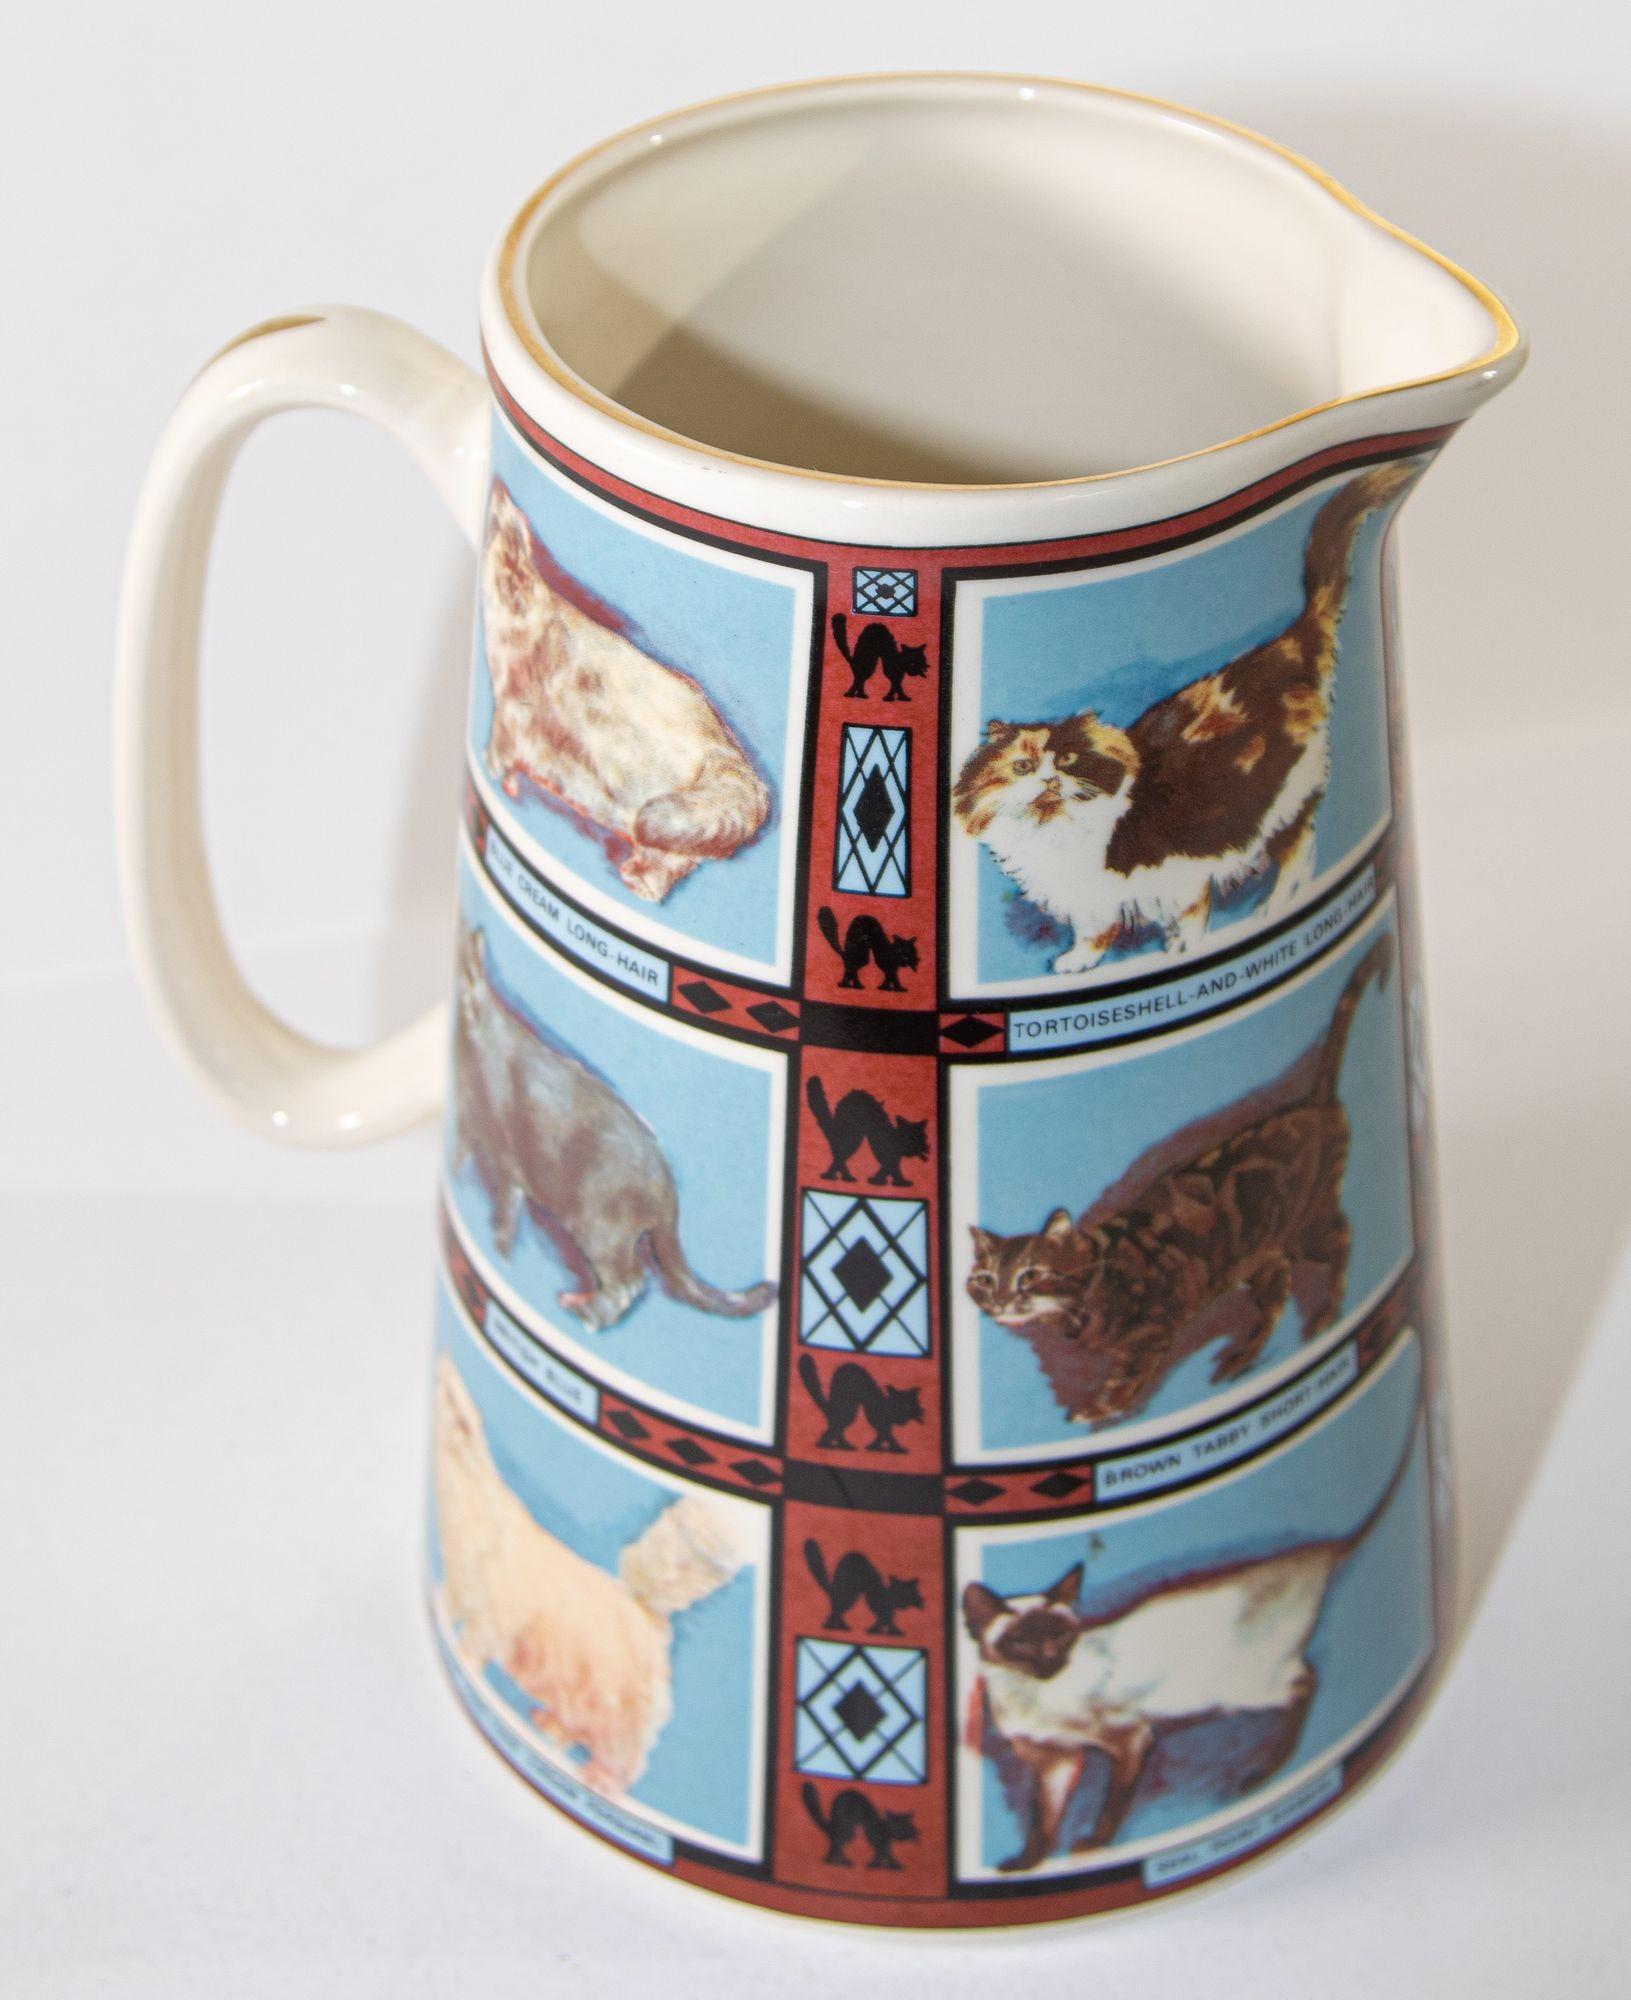 Vintage 1970s Ceramic Pitcher, Derbyshire England with Cat Breeds Pictures 12